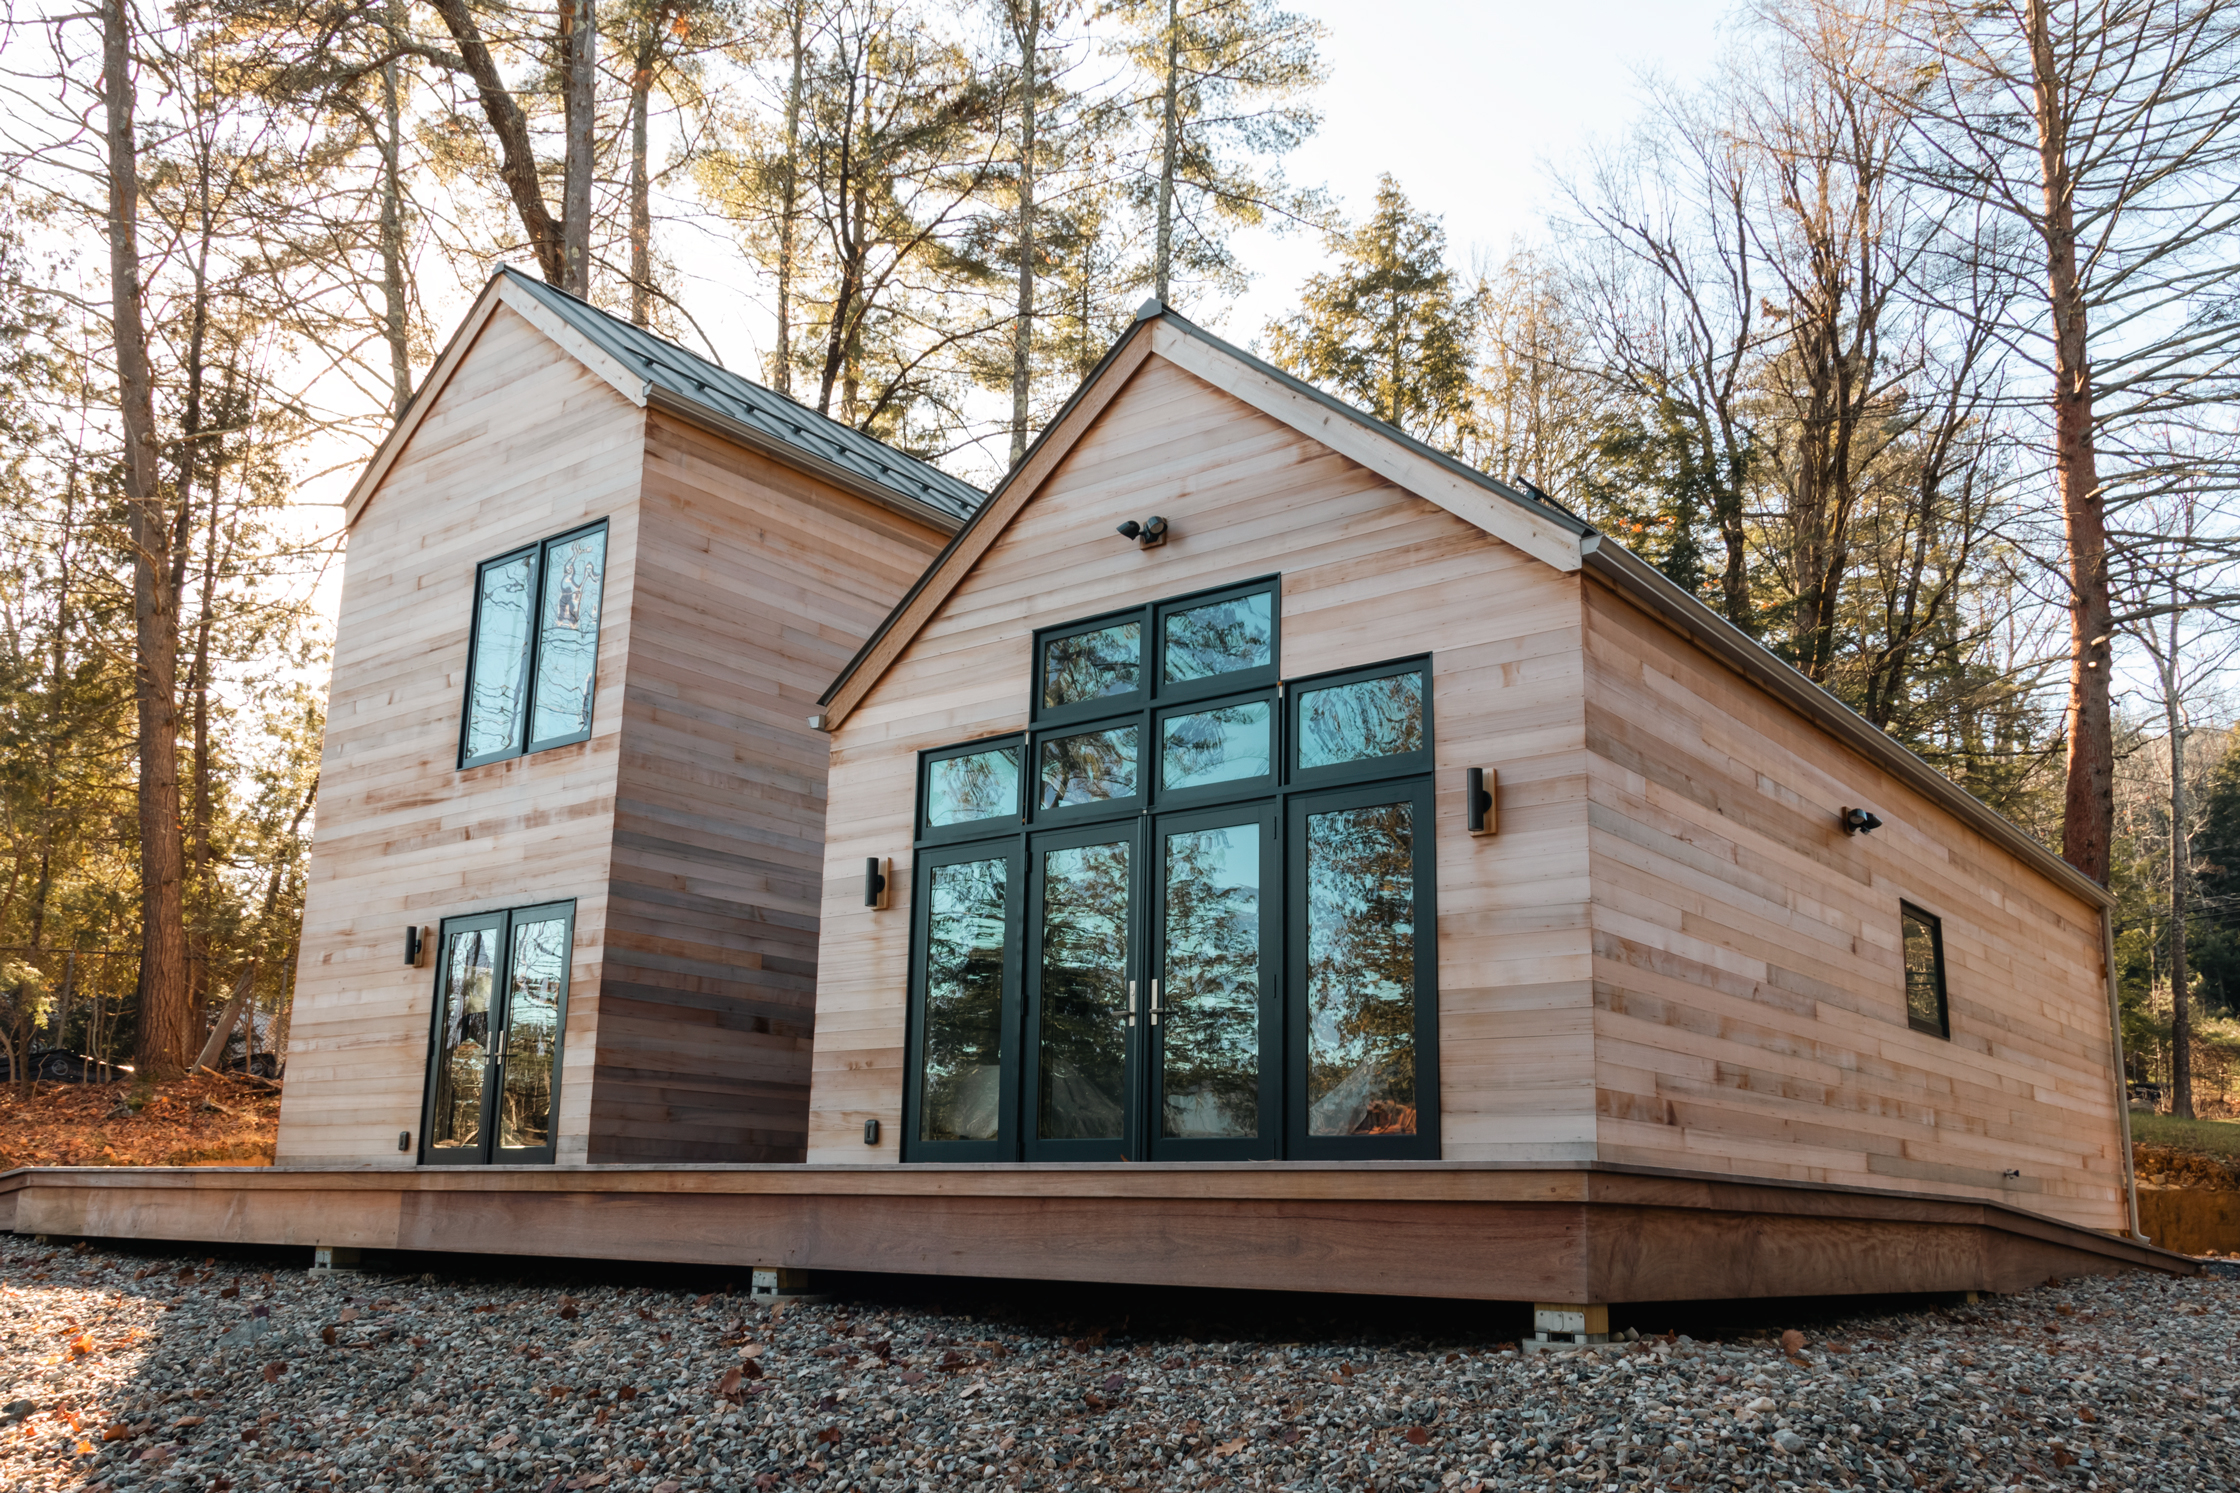 Tucked into the trees behind an overlooking Lake George Summer Home, this modern guest cottage retreat gives peaking Adirondack Views. 